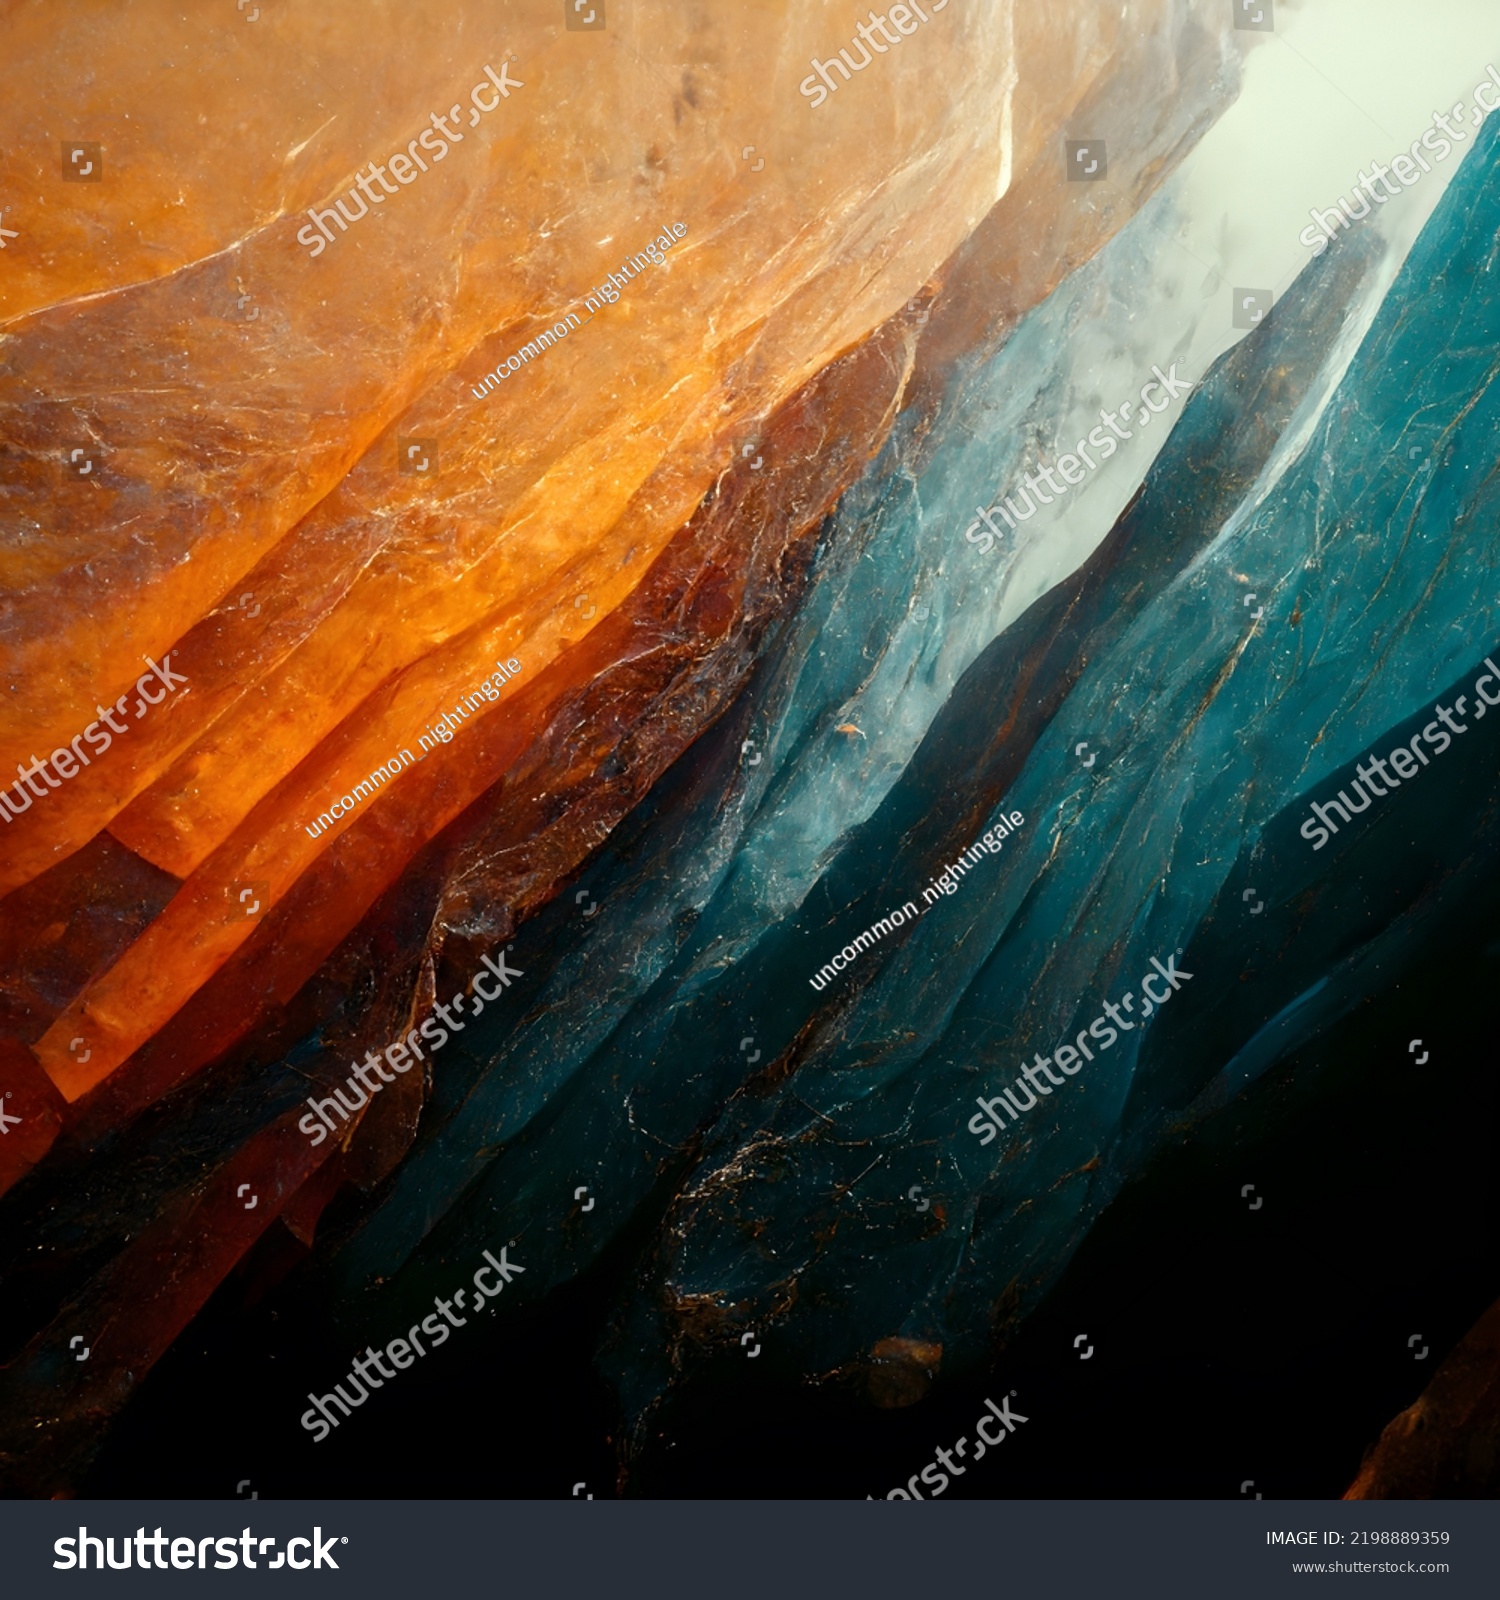 Abstract ice and amber cave background #2198889359